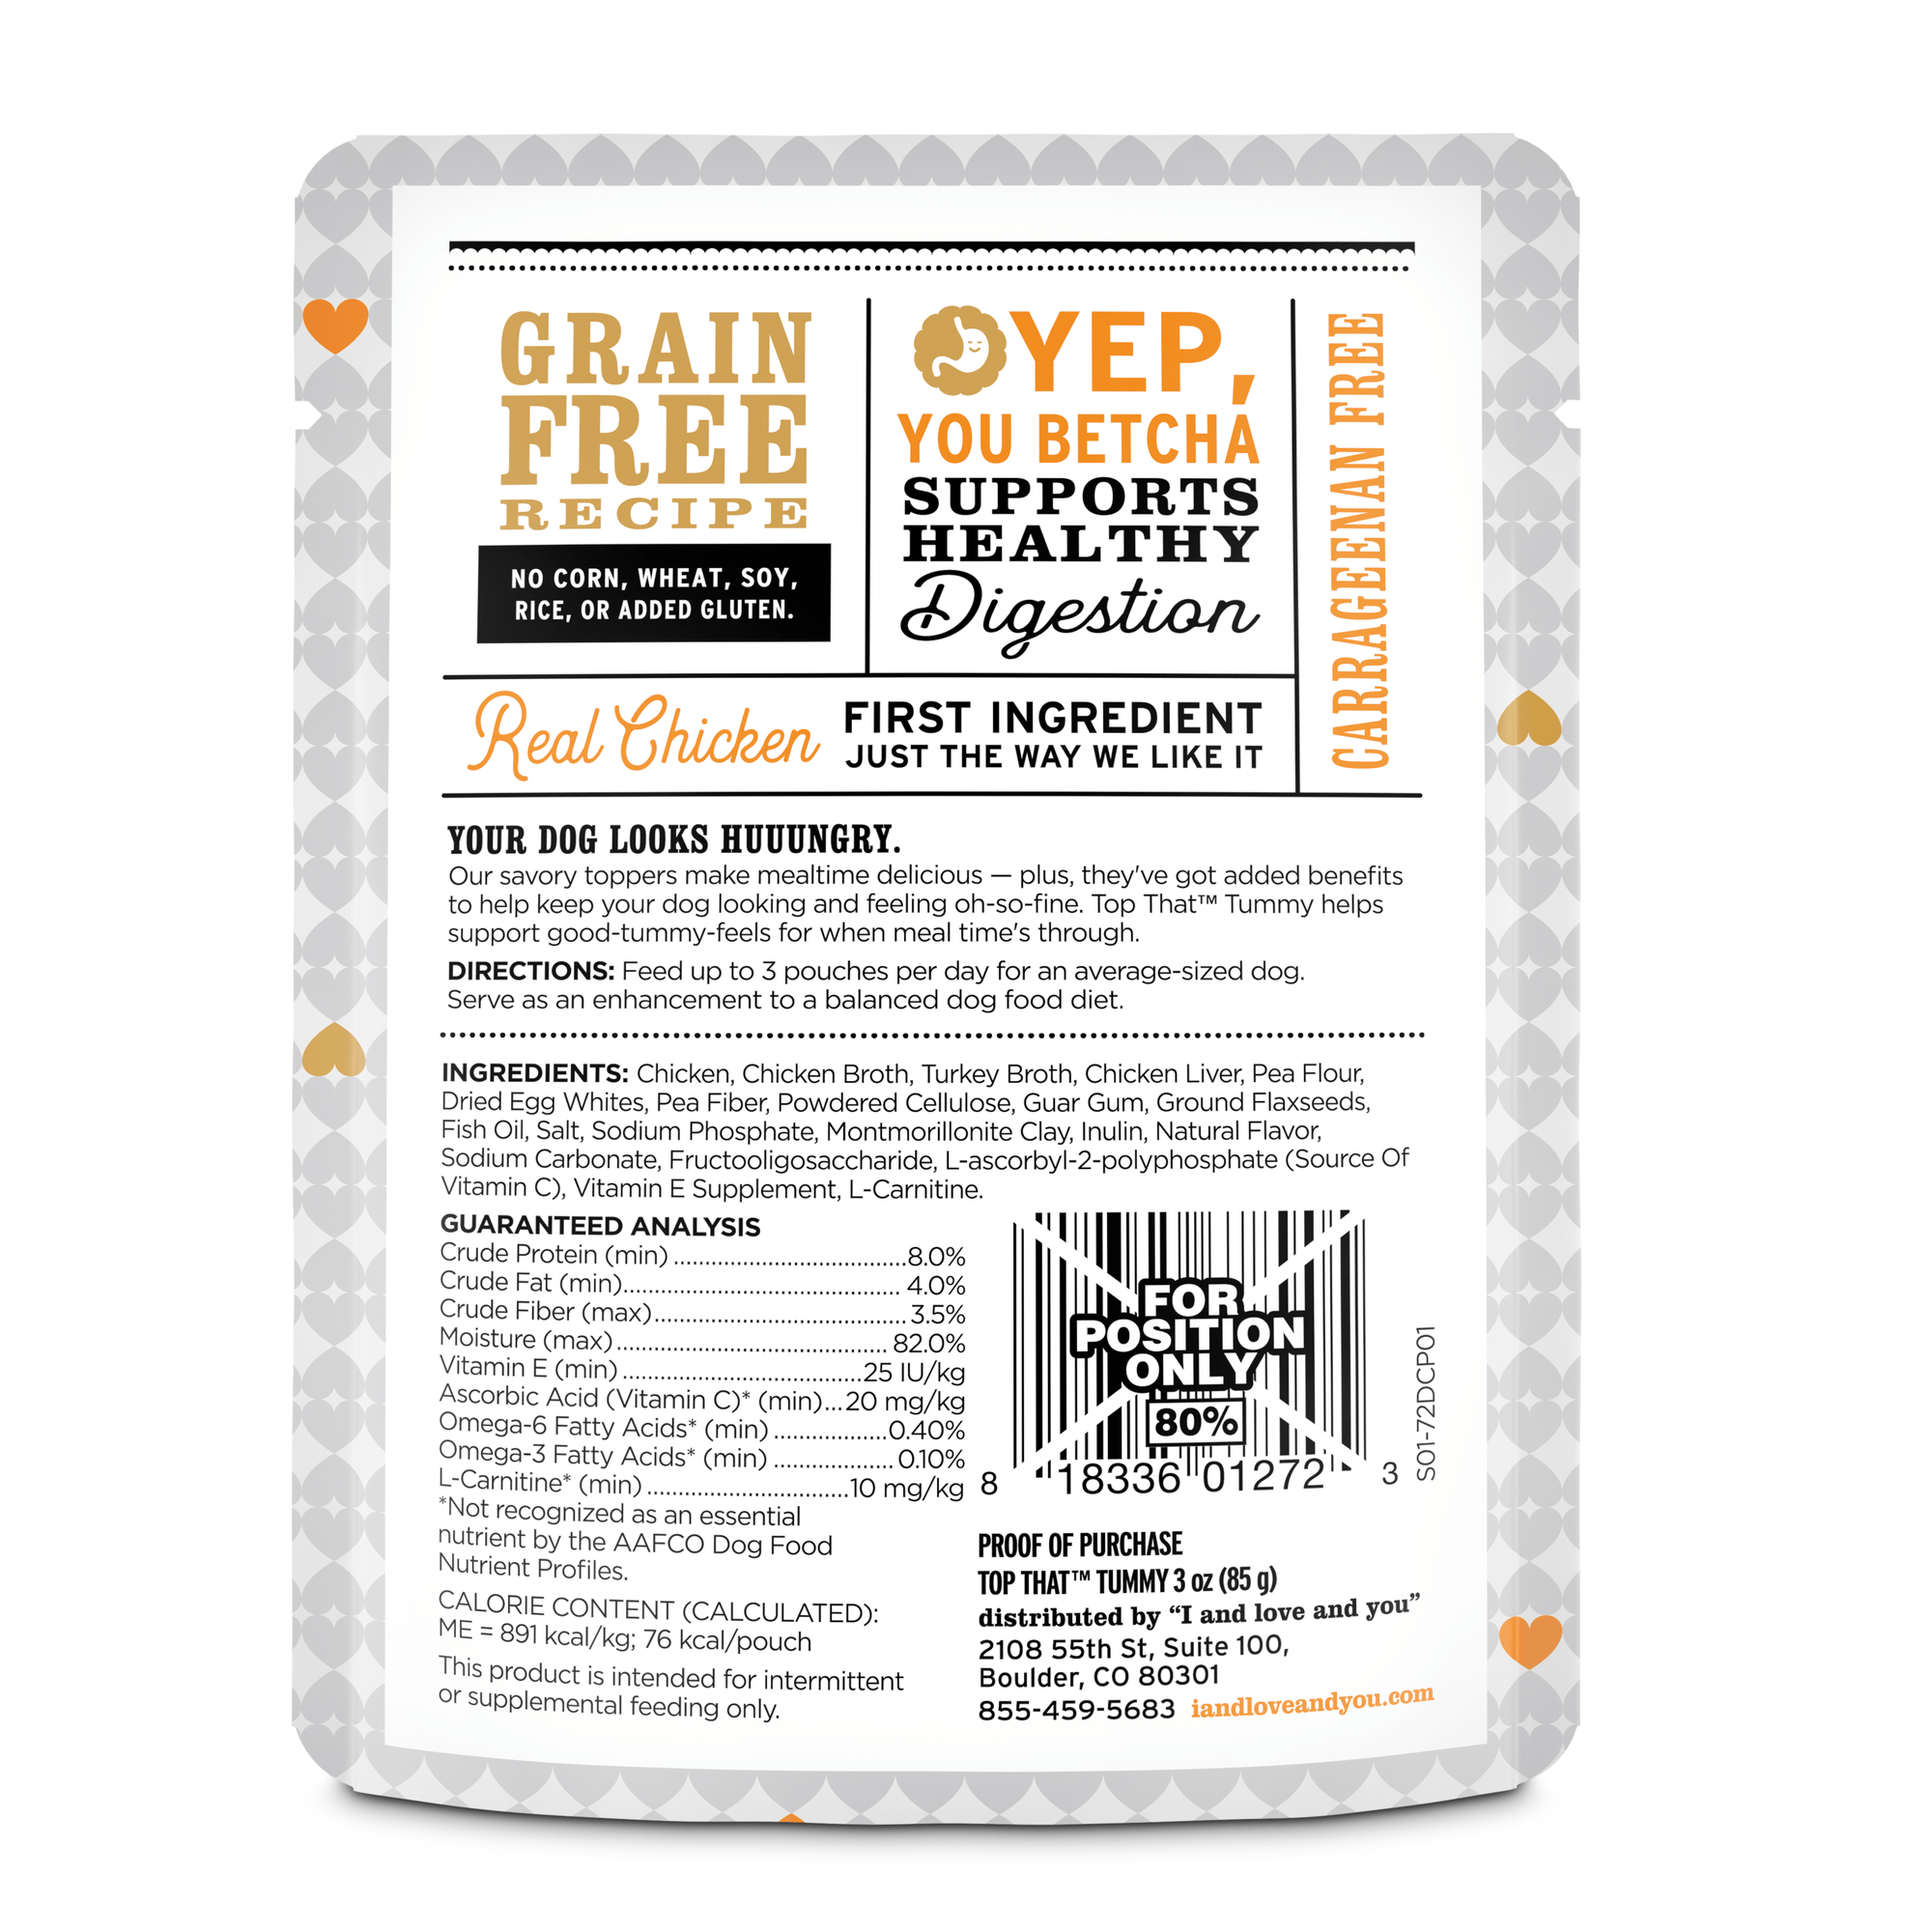 Top That Tummy - Chicken Recipe dog food bag back side with list of ingredients, instructions and barcode.